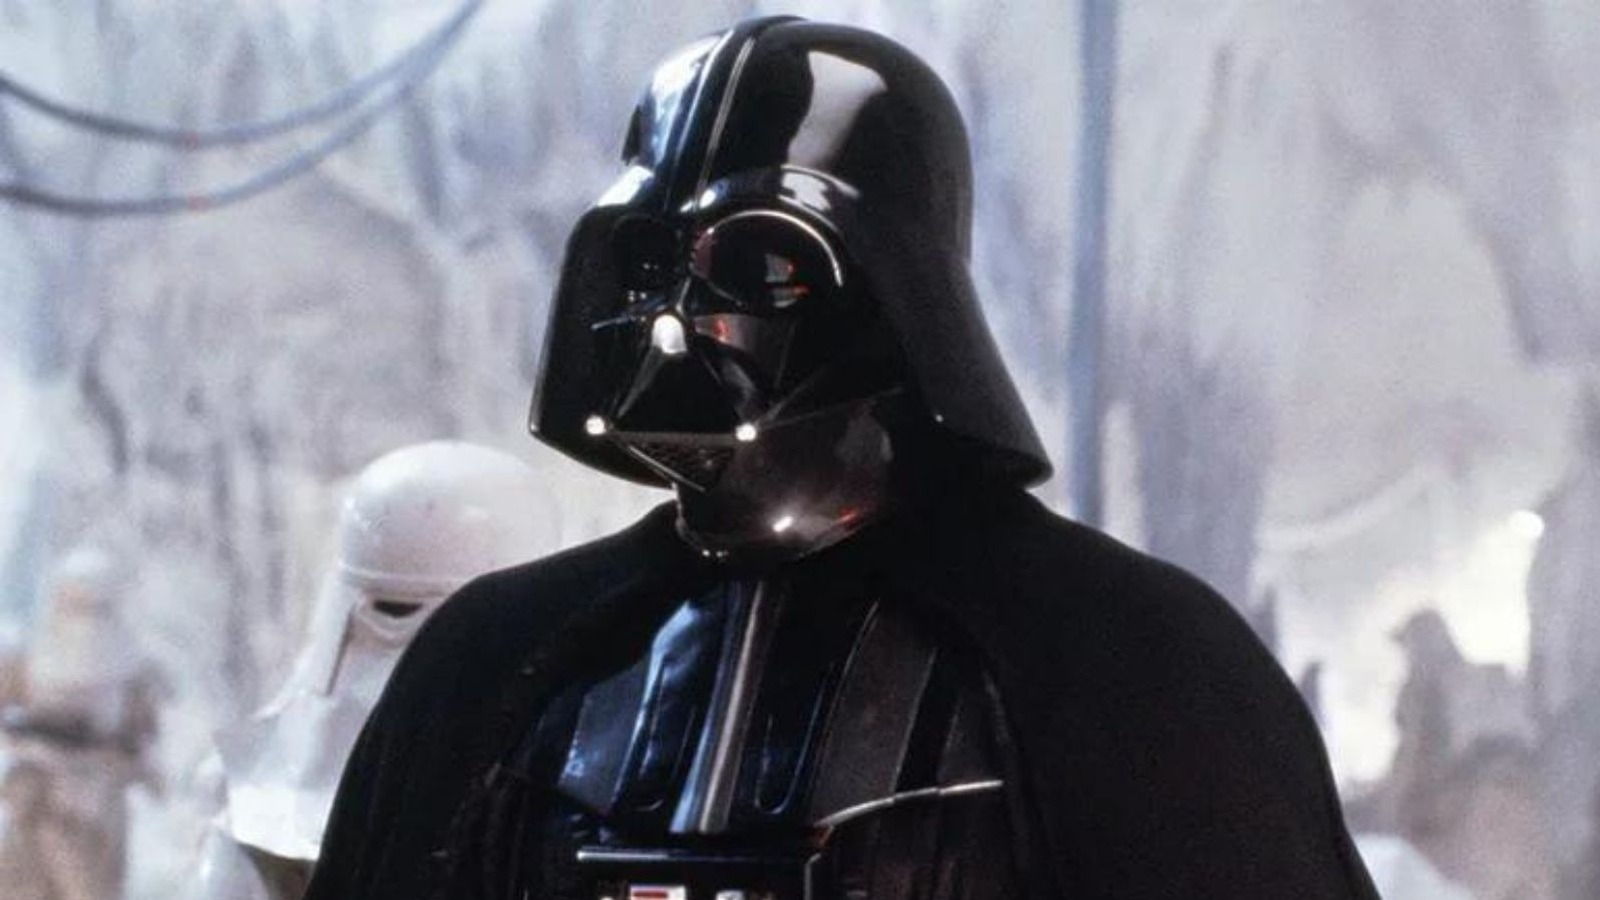 #How The Star Wars Crew (Tried To) Keep The Darth Vader Reveal Under Wraps